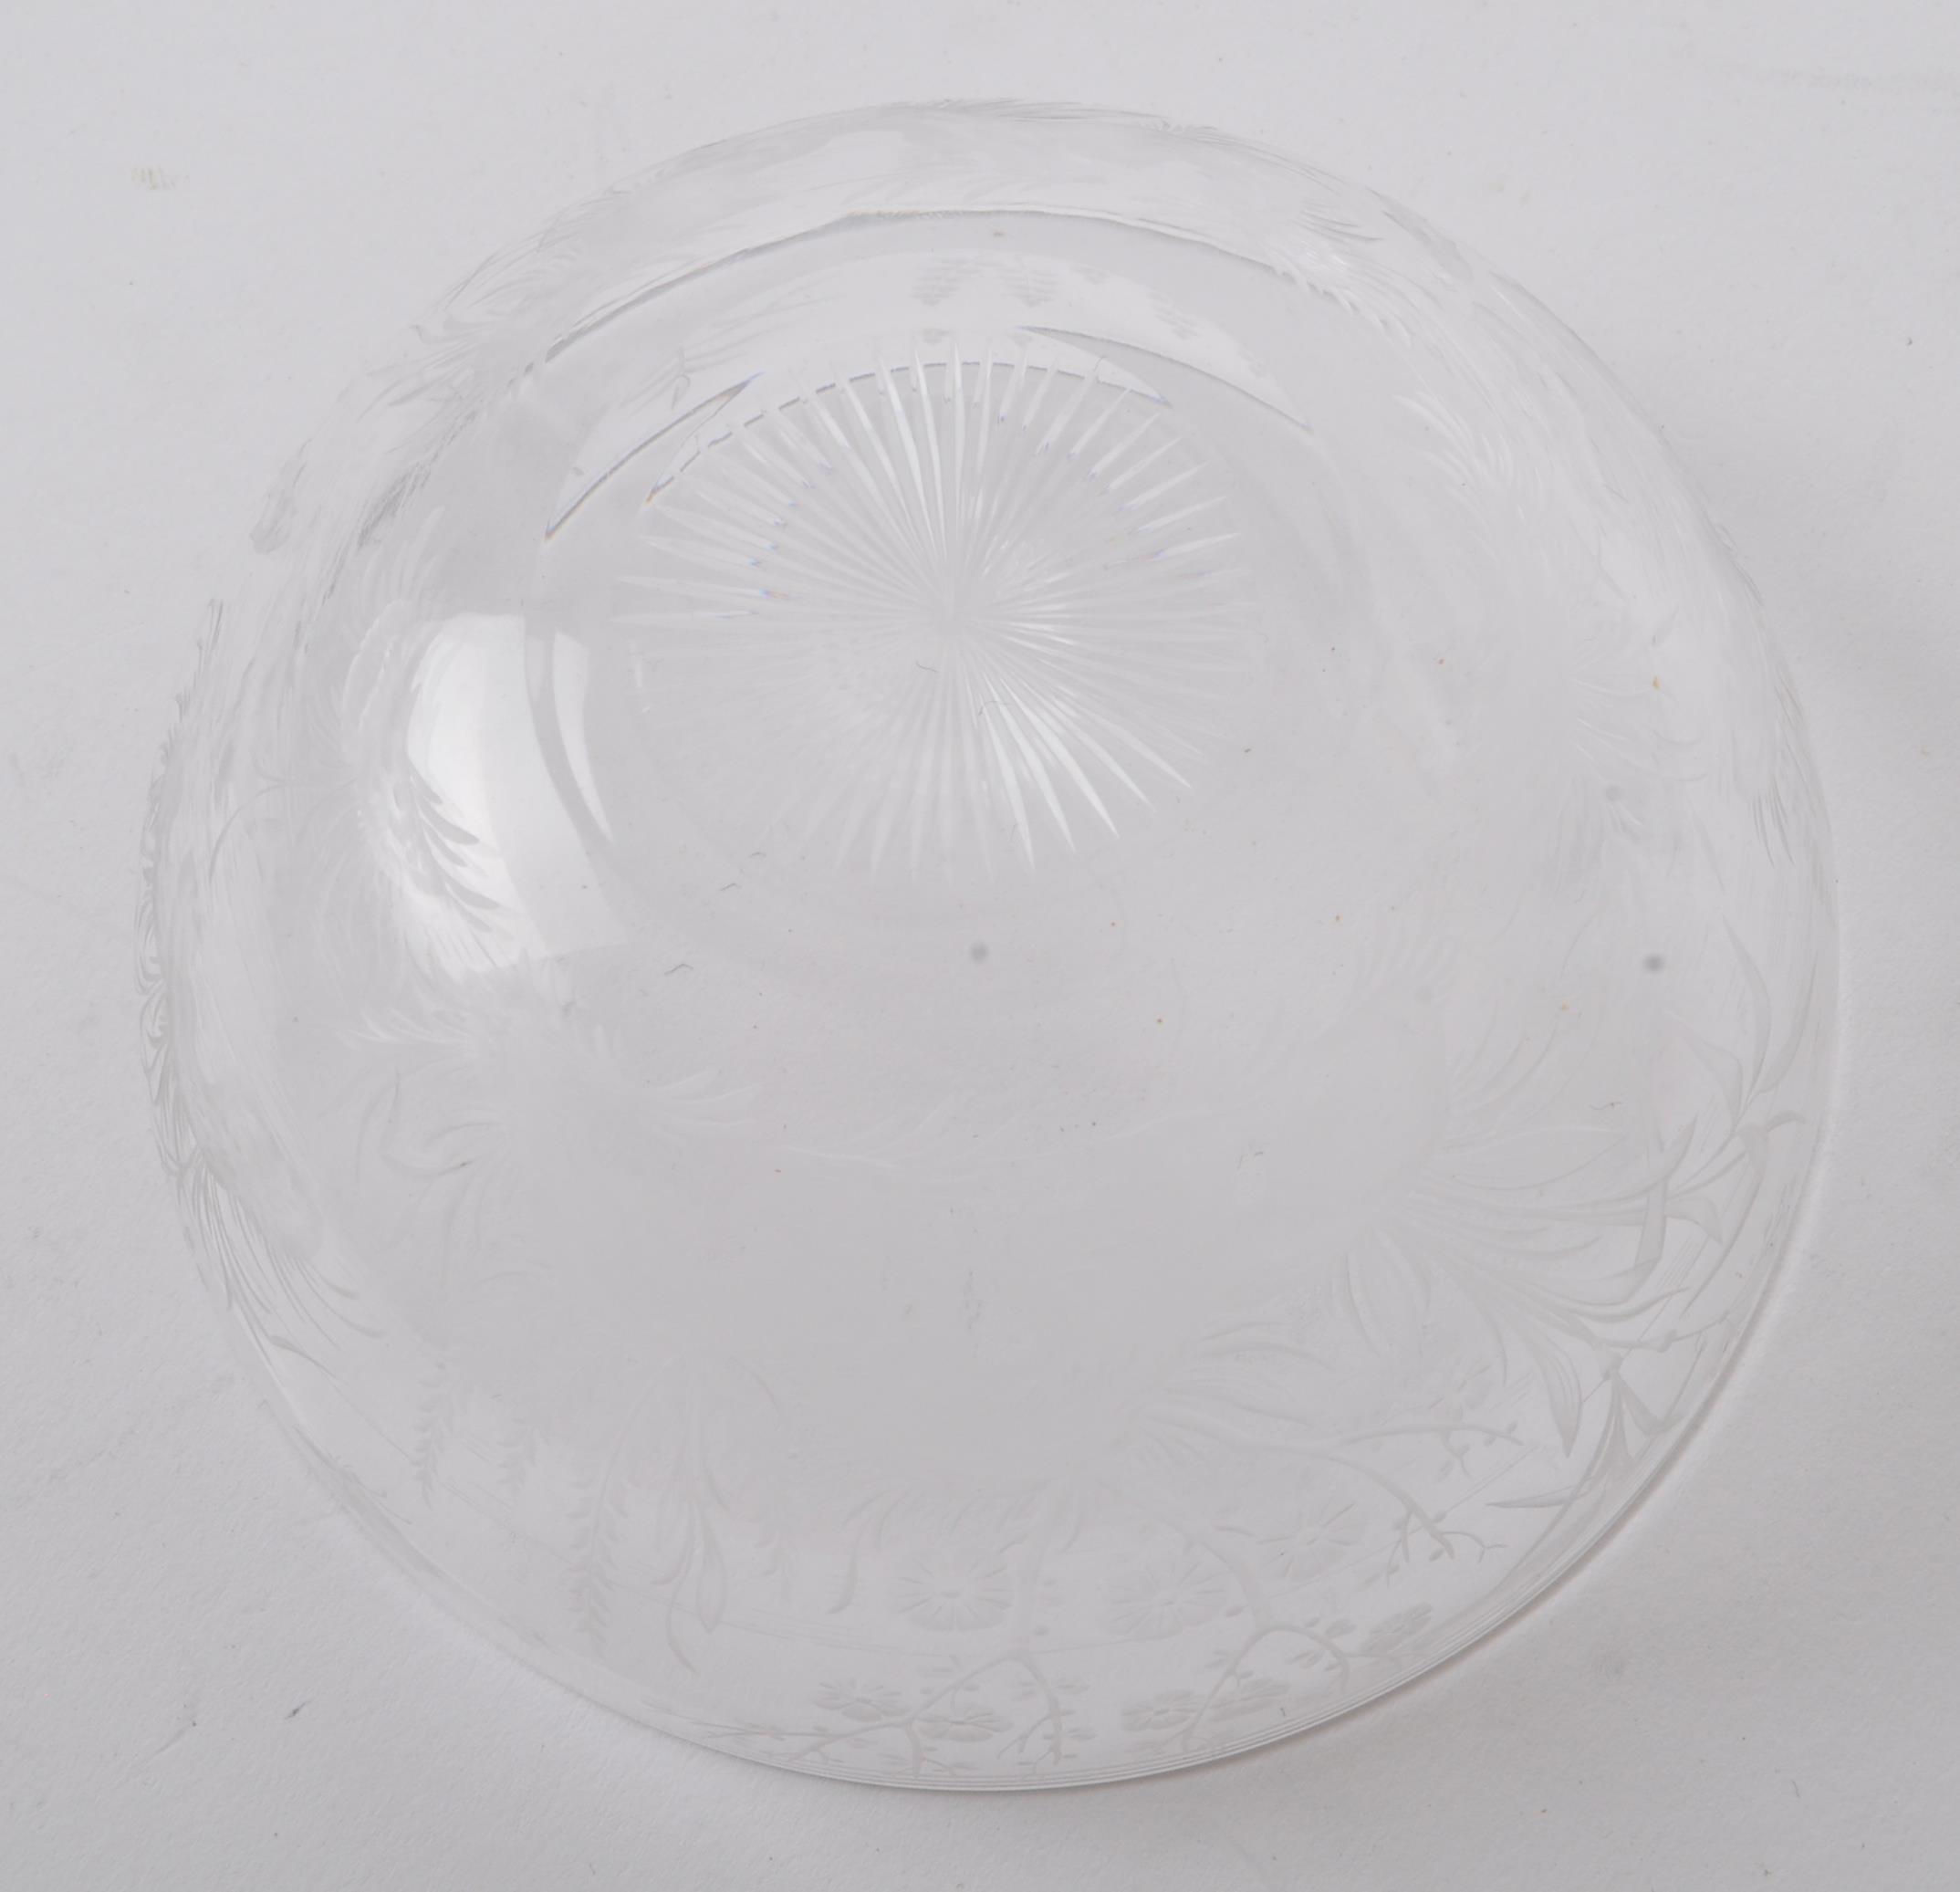 EARLY 20TH CENTURY ETCHED CHINOISERIE GLASS DISH - Image 6 of 6